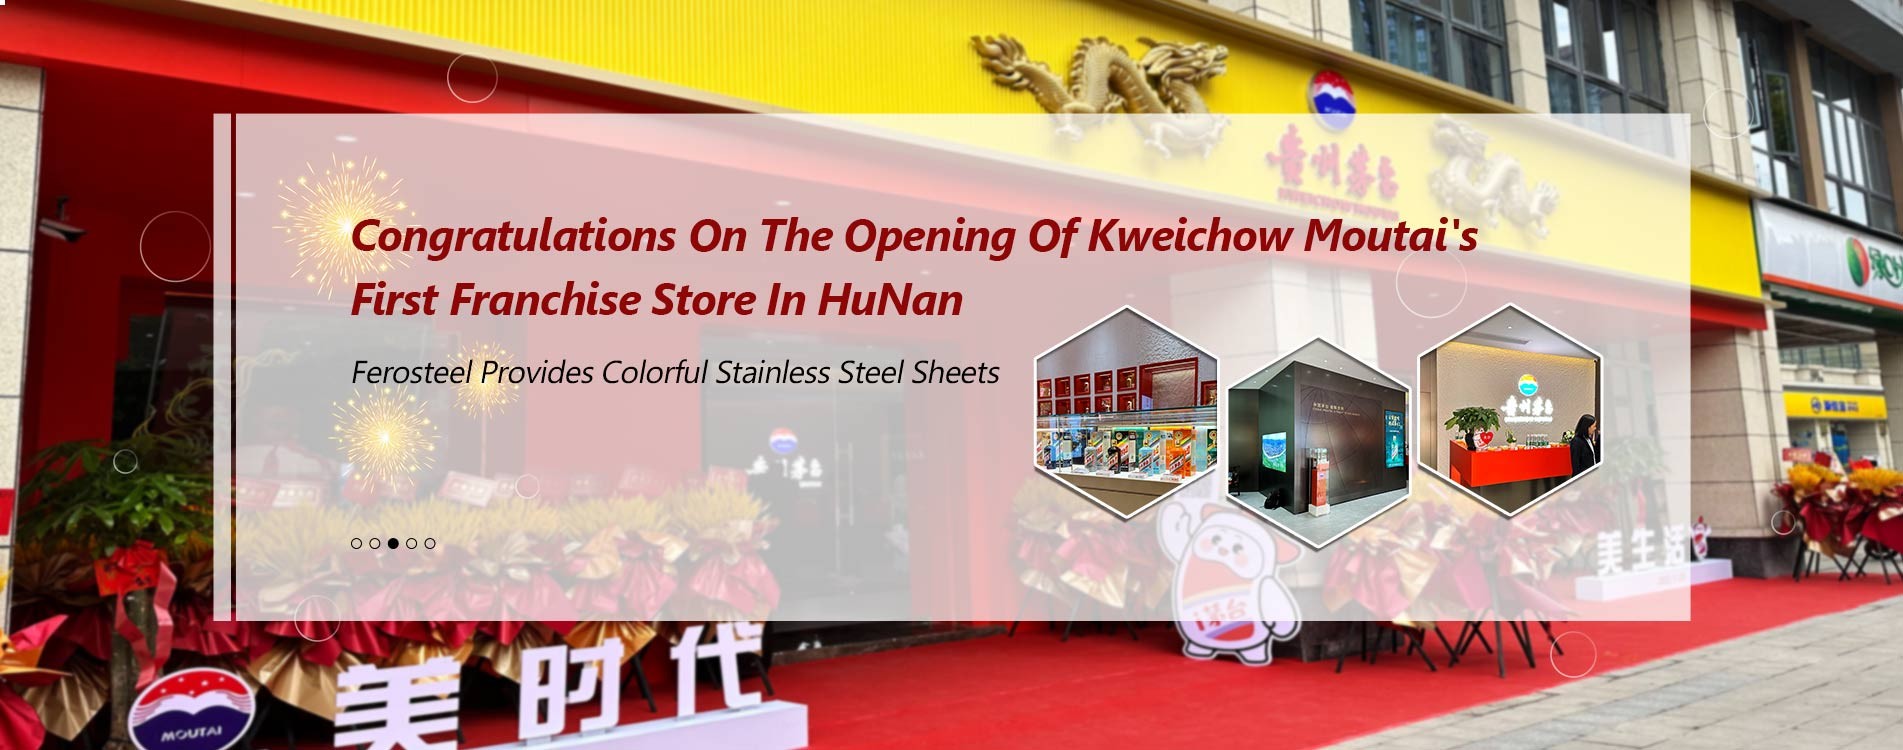 Congratulations on the opening of Kweichow Moutai's first franchise store in Hunan